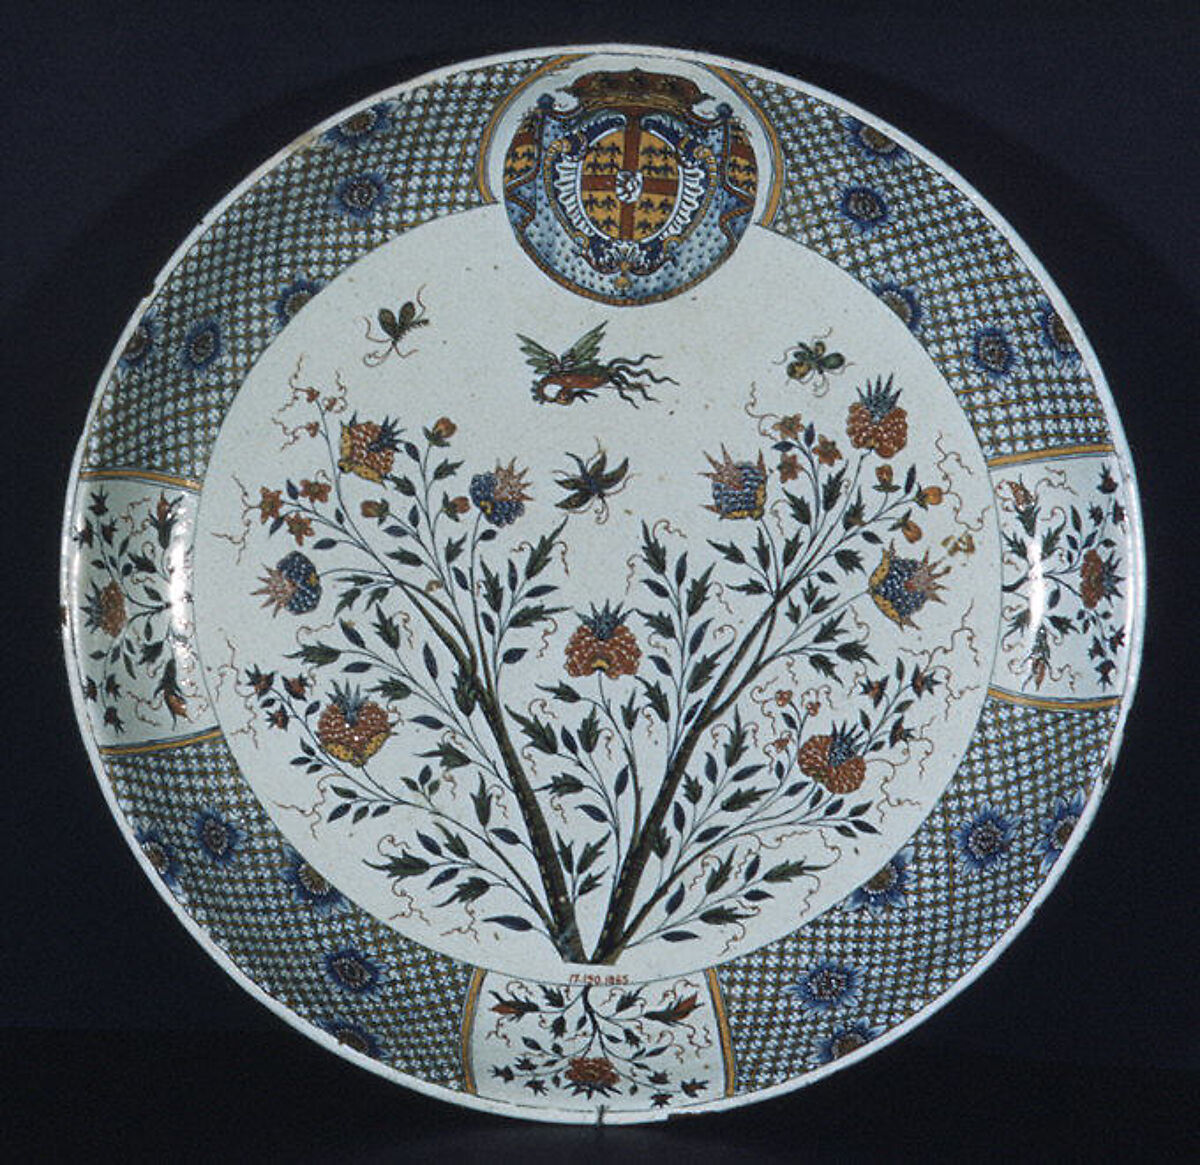 Salad bowl (Saladier), Factory of Jean-Baptiste Guillibaud (working 1720–39), Faience (tin-glazed earthenware), French, Rouen 